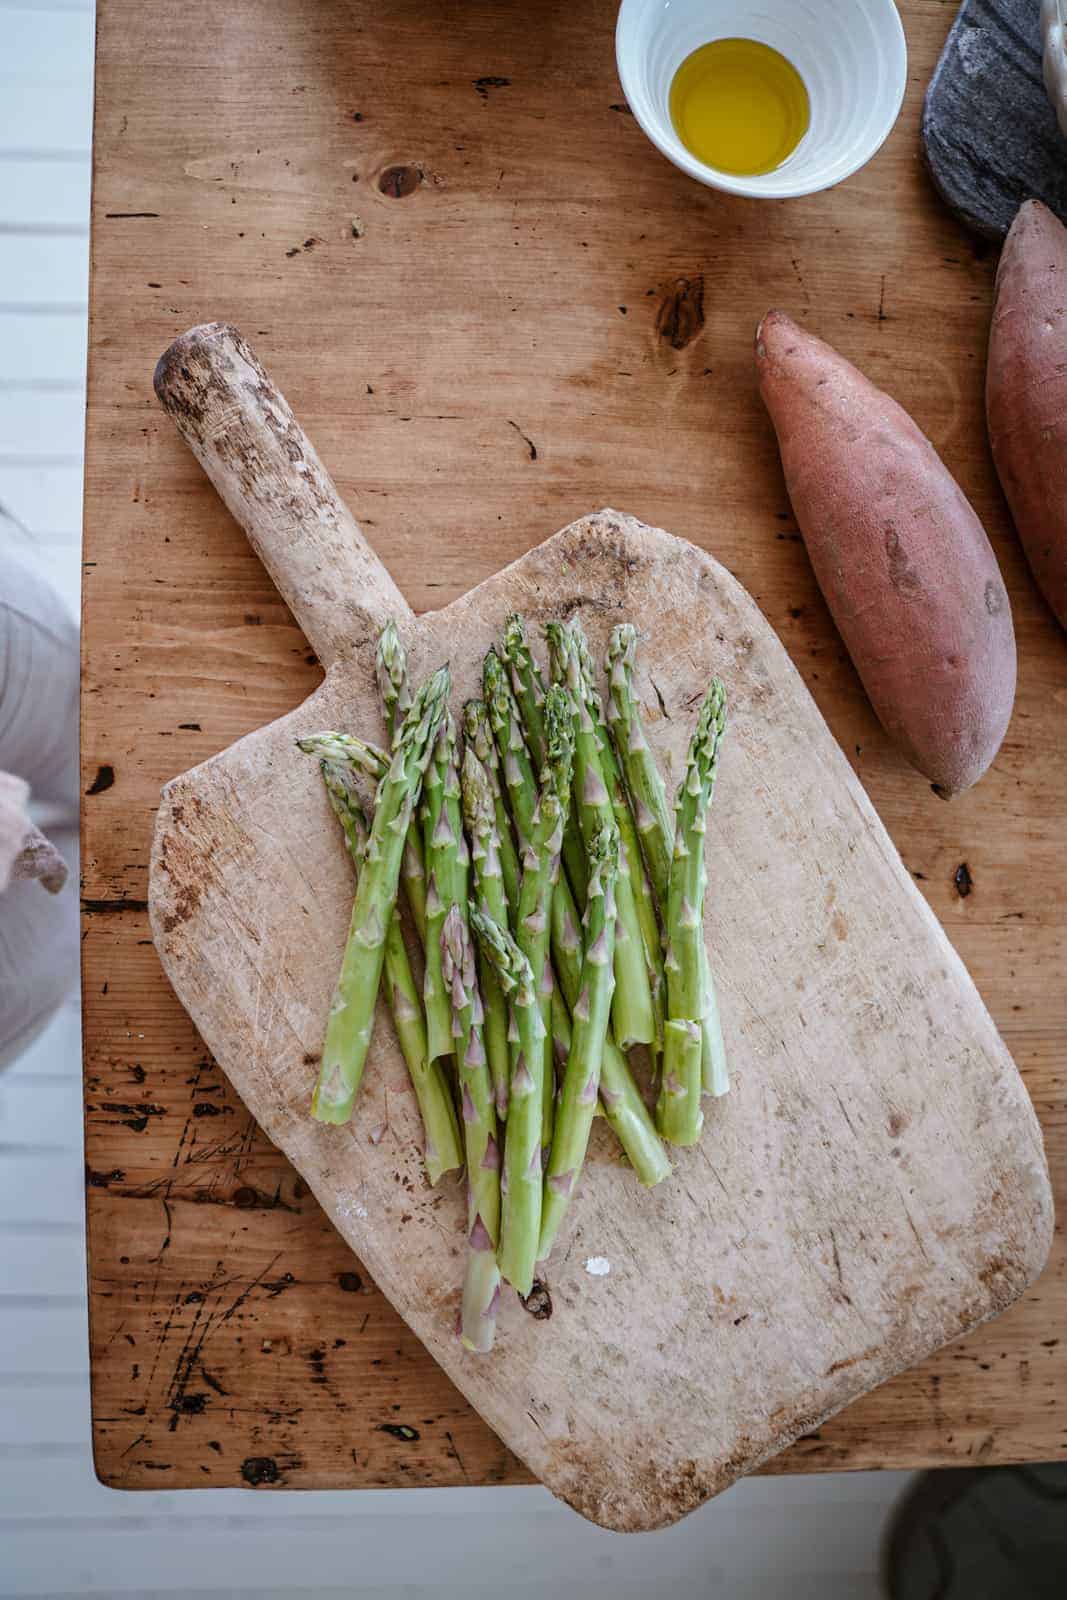 Asparagus on a cutting board surrounded by sweet potatoes.